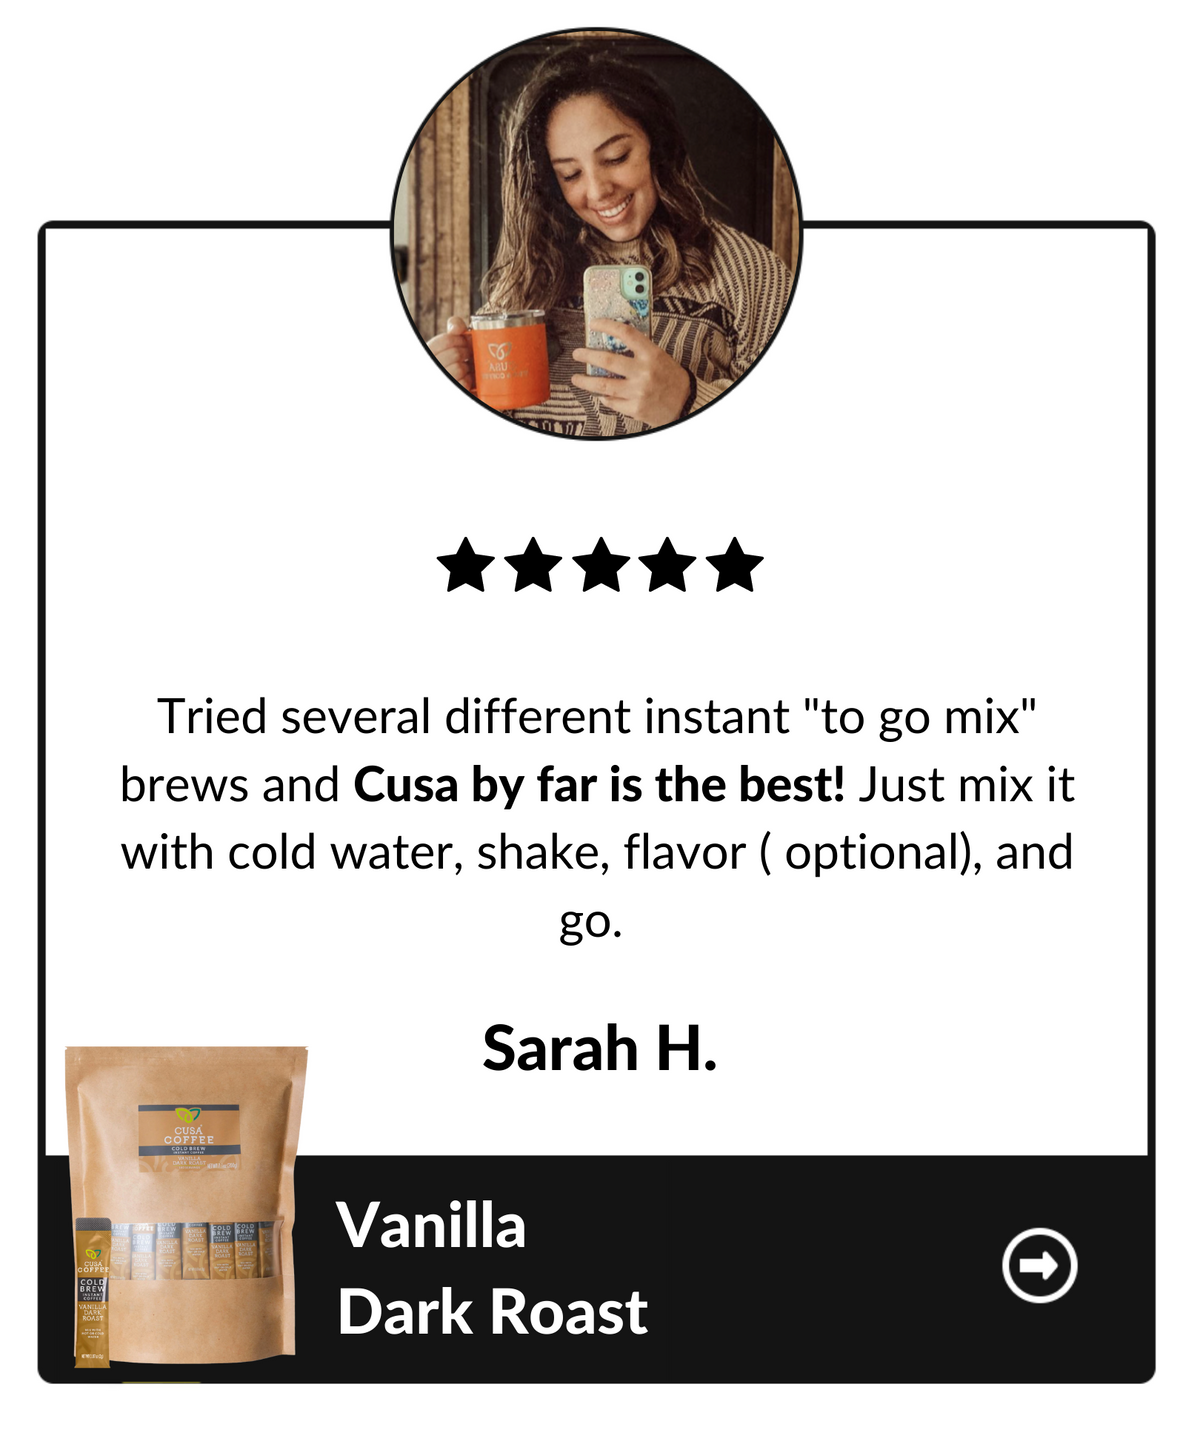 Tried several different instant "to go mix" brews and Cusa by far is the best! Just mix it with cold water, shake, flavor (optional) and go. Sarah H, Vanilla dark roast testimonial